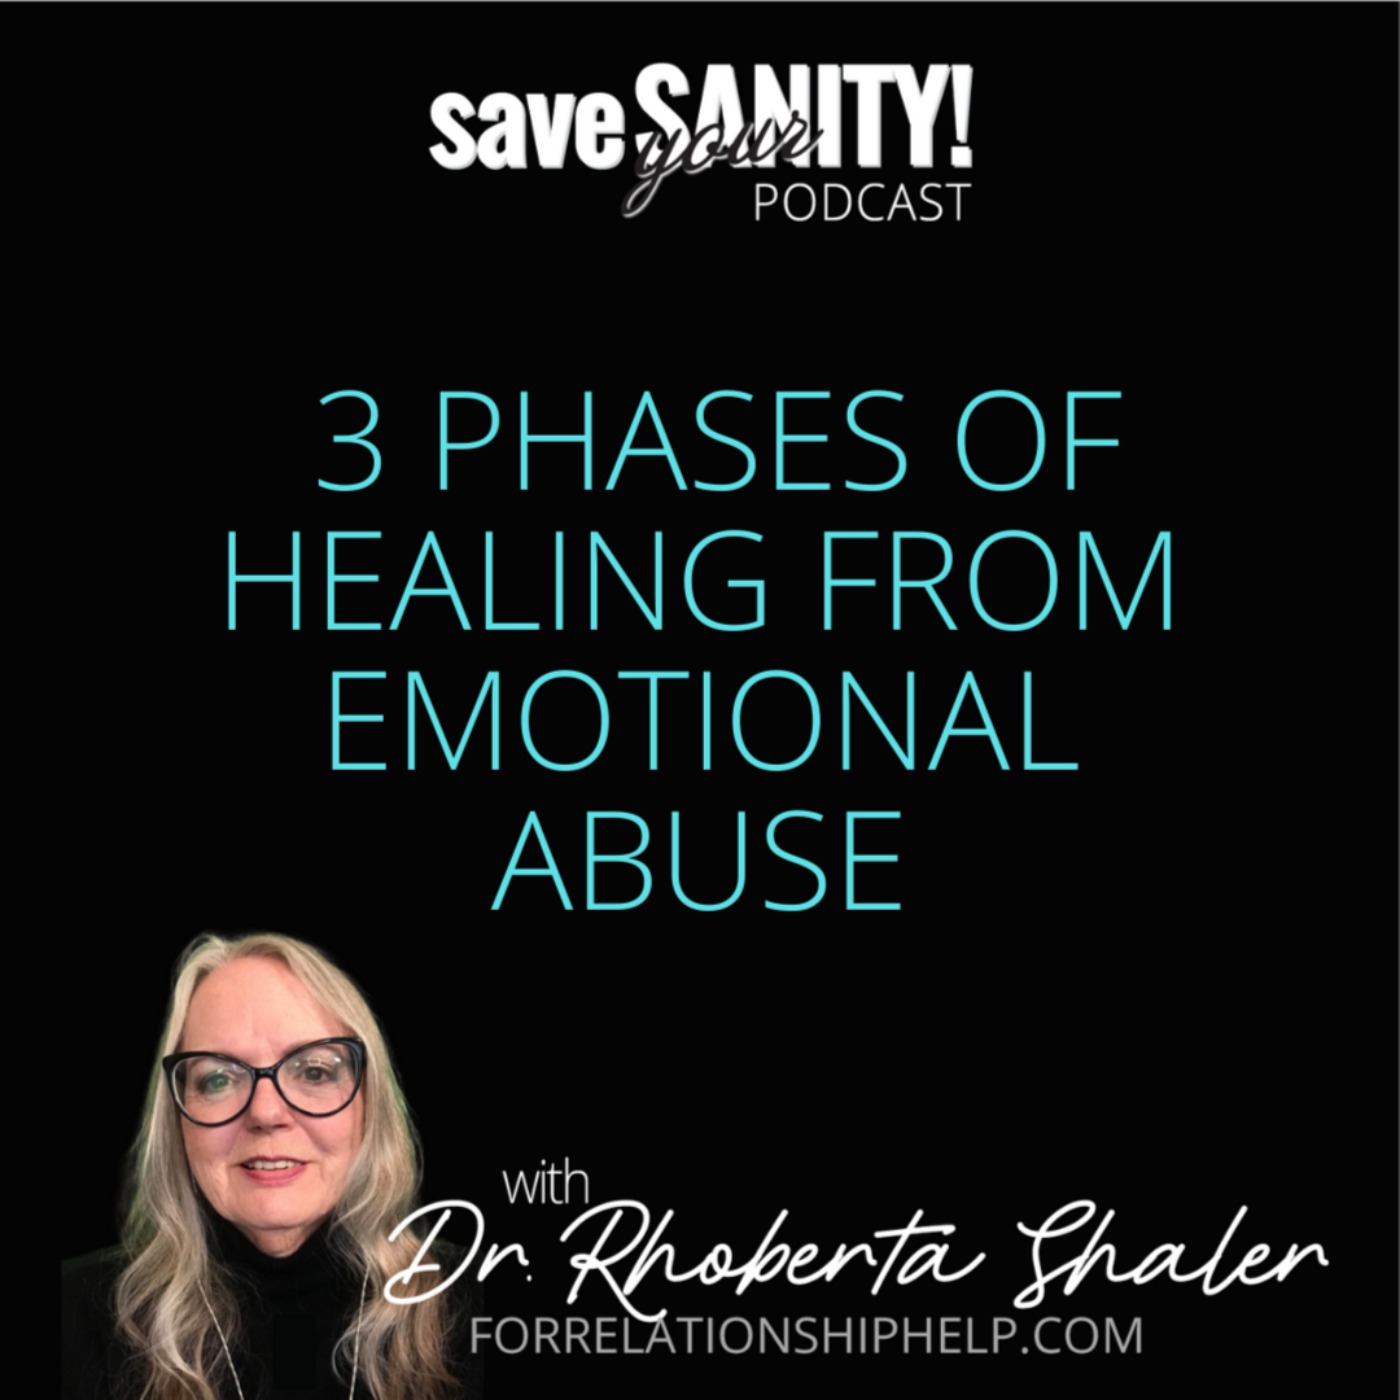 3 Phases of Healing From Emotional Abuse